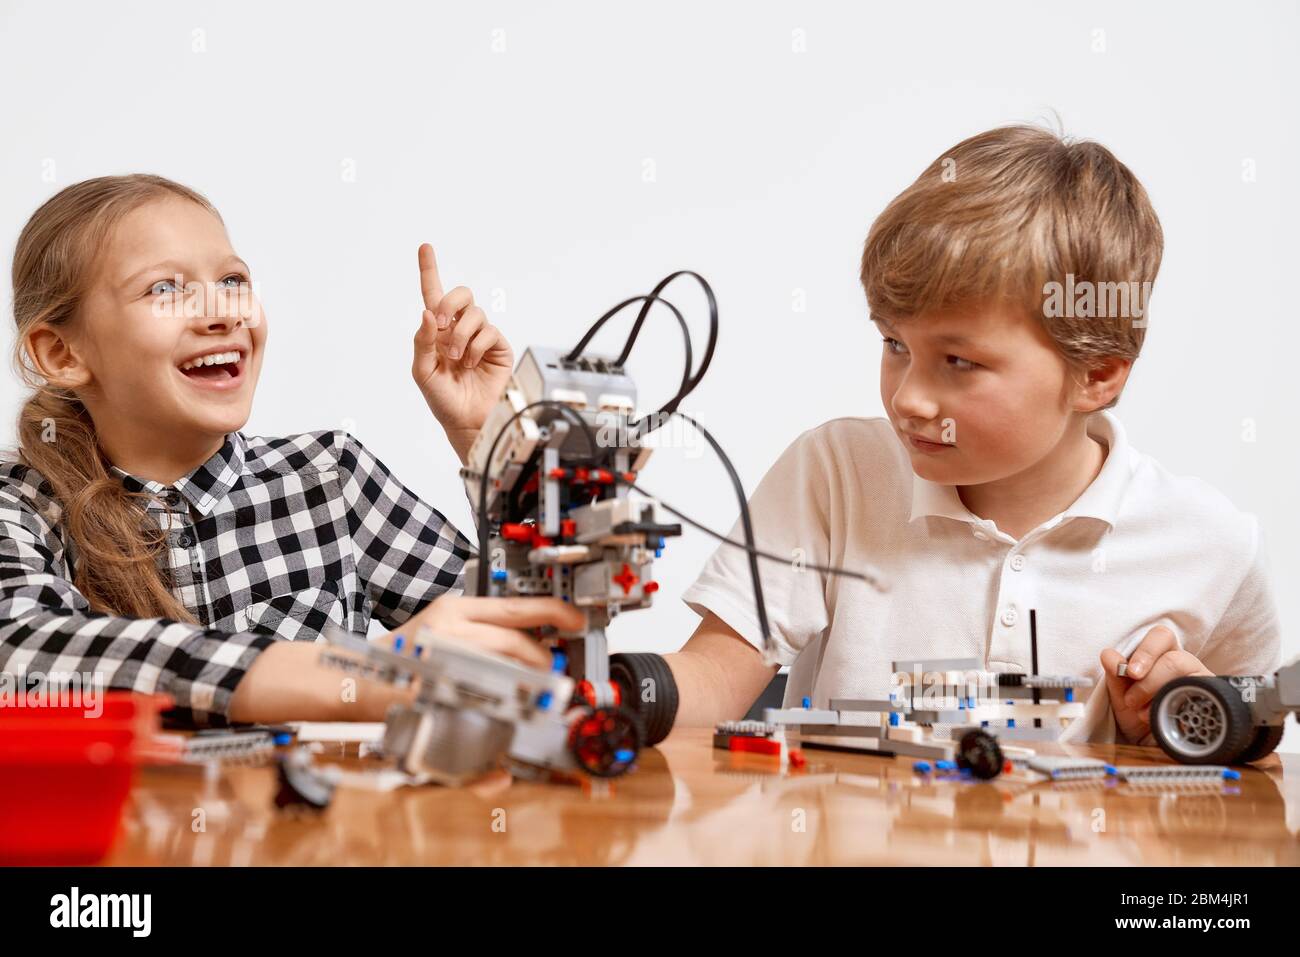 Front view of boy and girl having fun, creating vehicle. Science engineering. Friends working on project together, girl having idea and pointing with finger up. Building kit for kids on table. Stock Photo